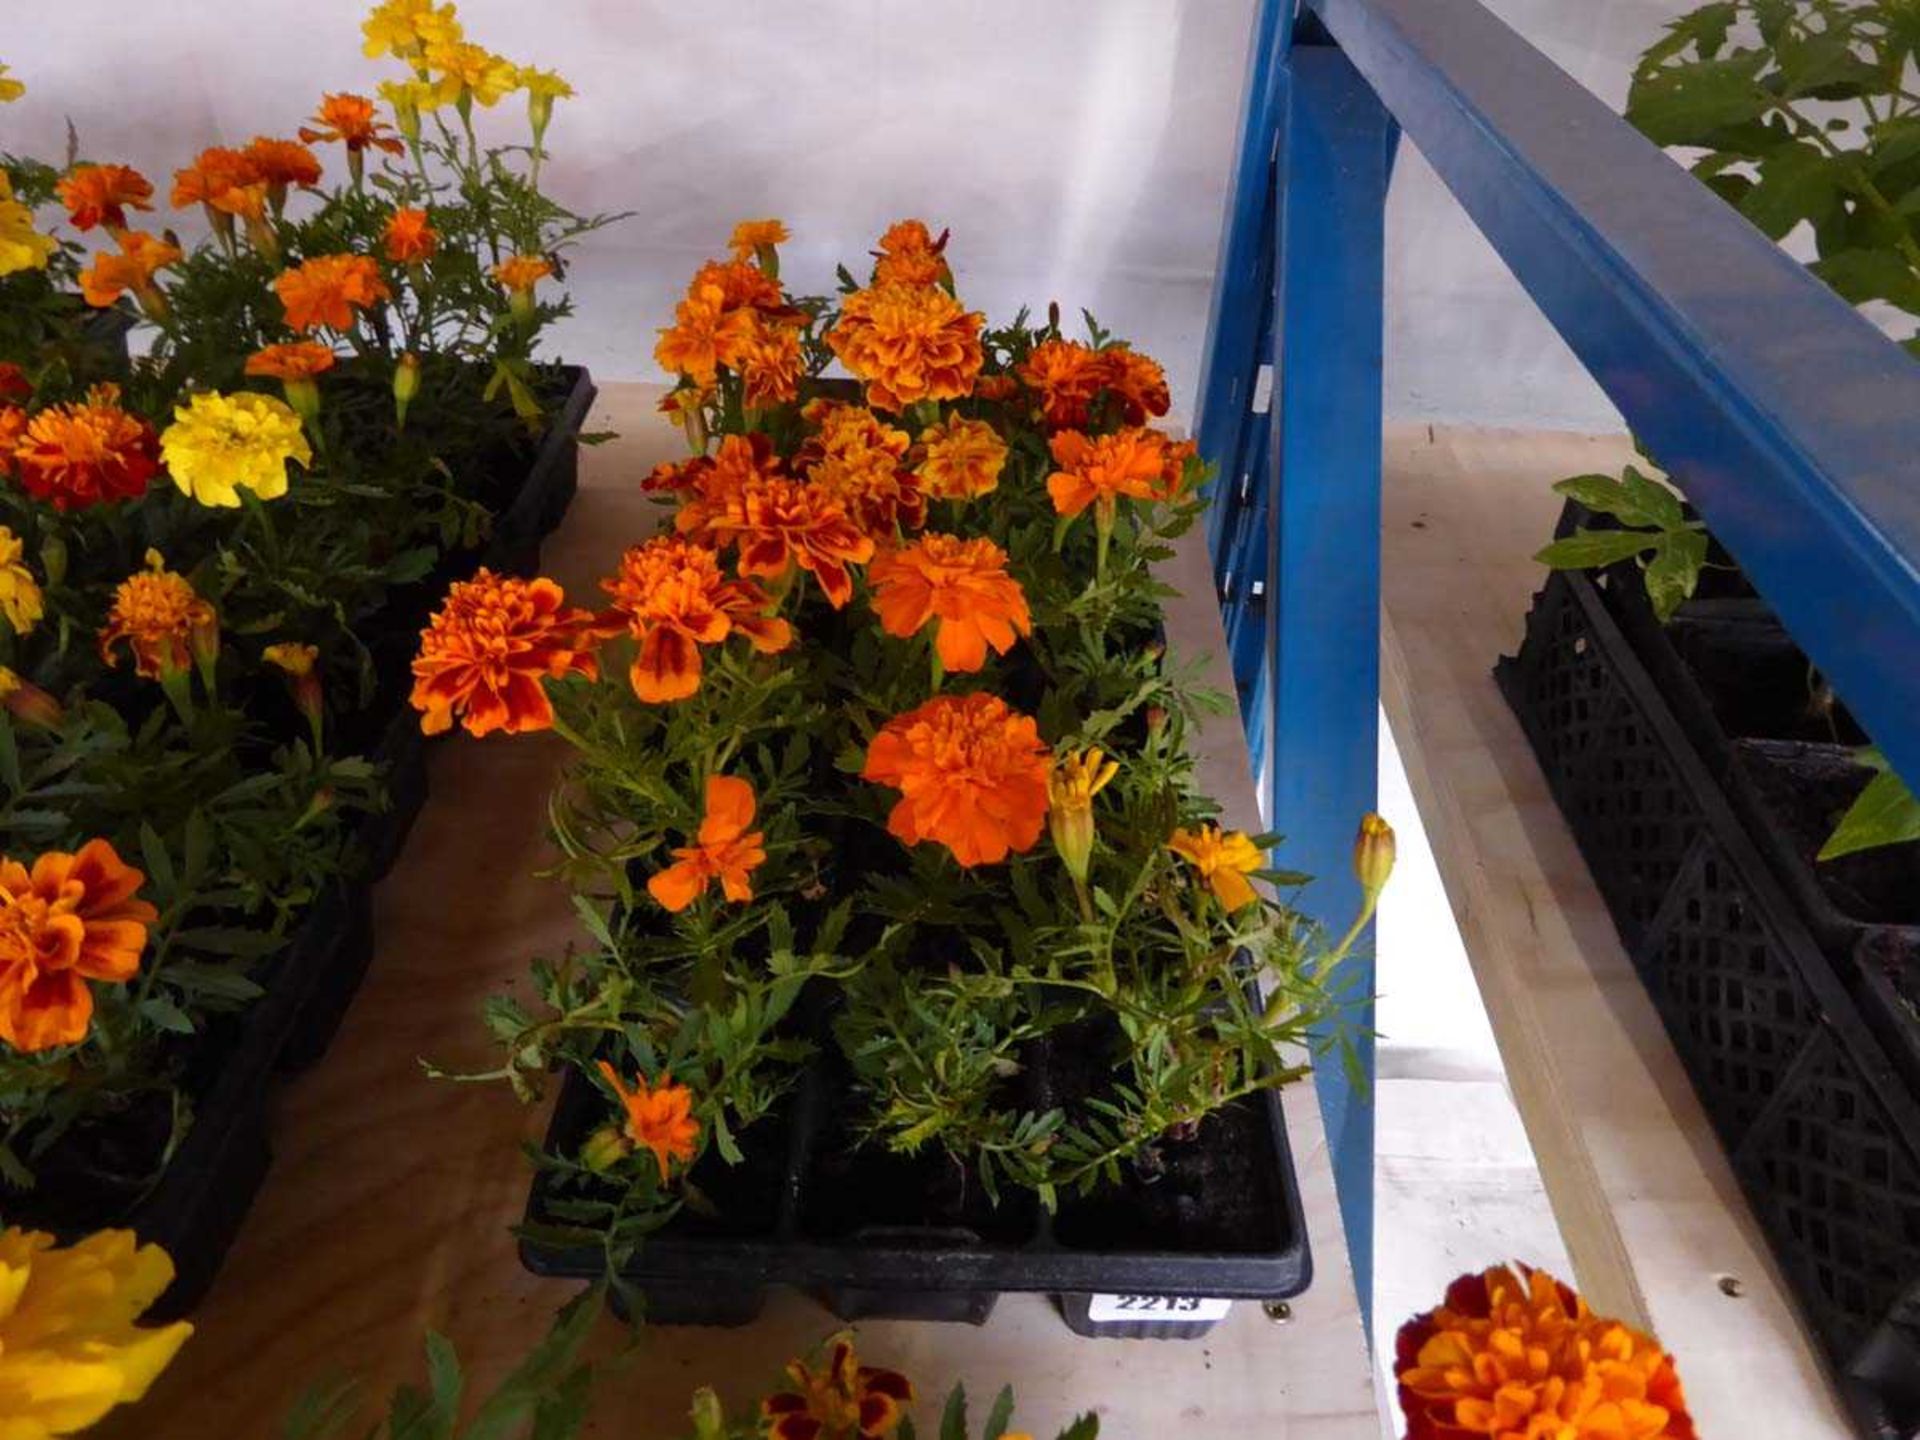 3 trays of French marigolds